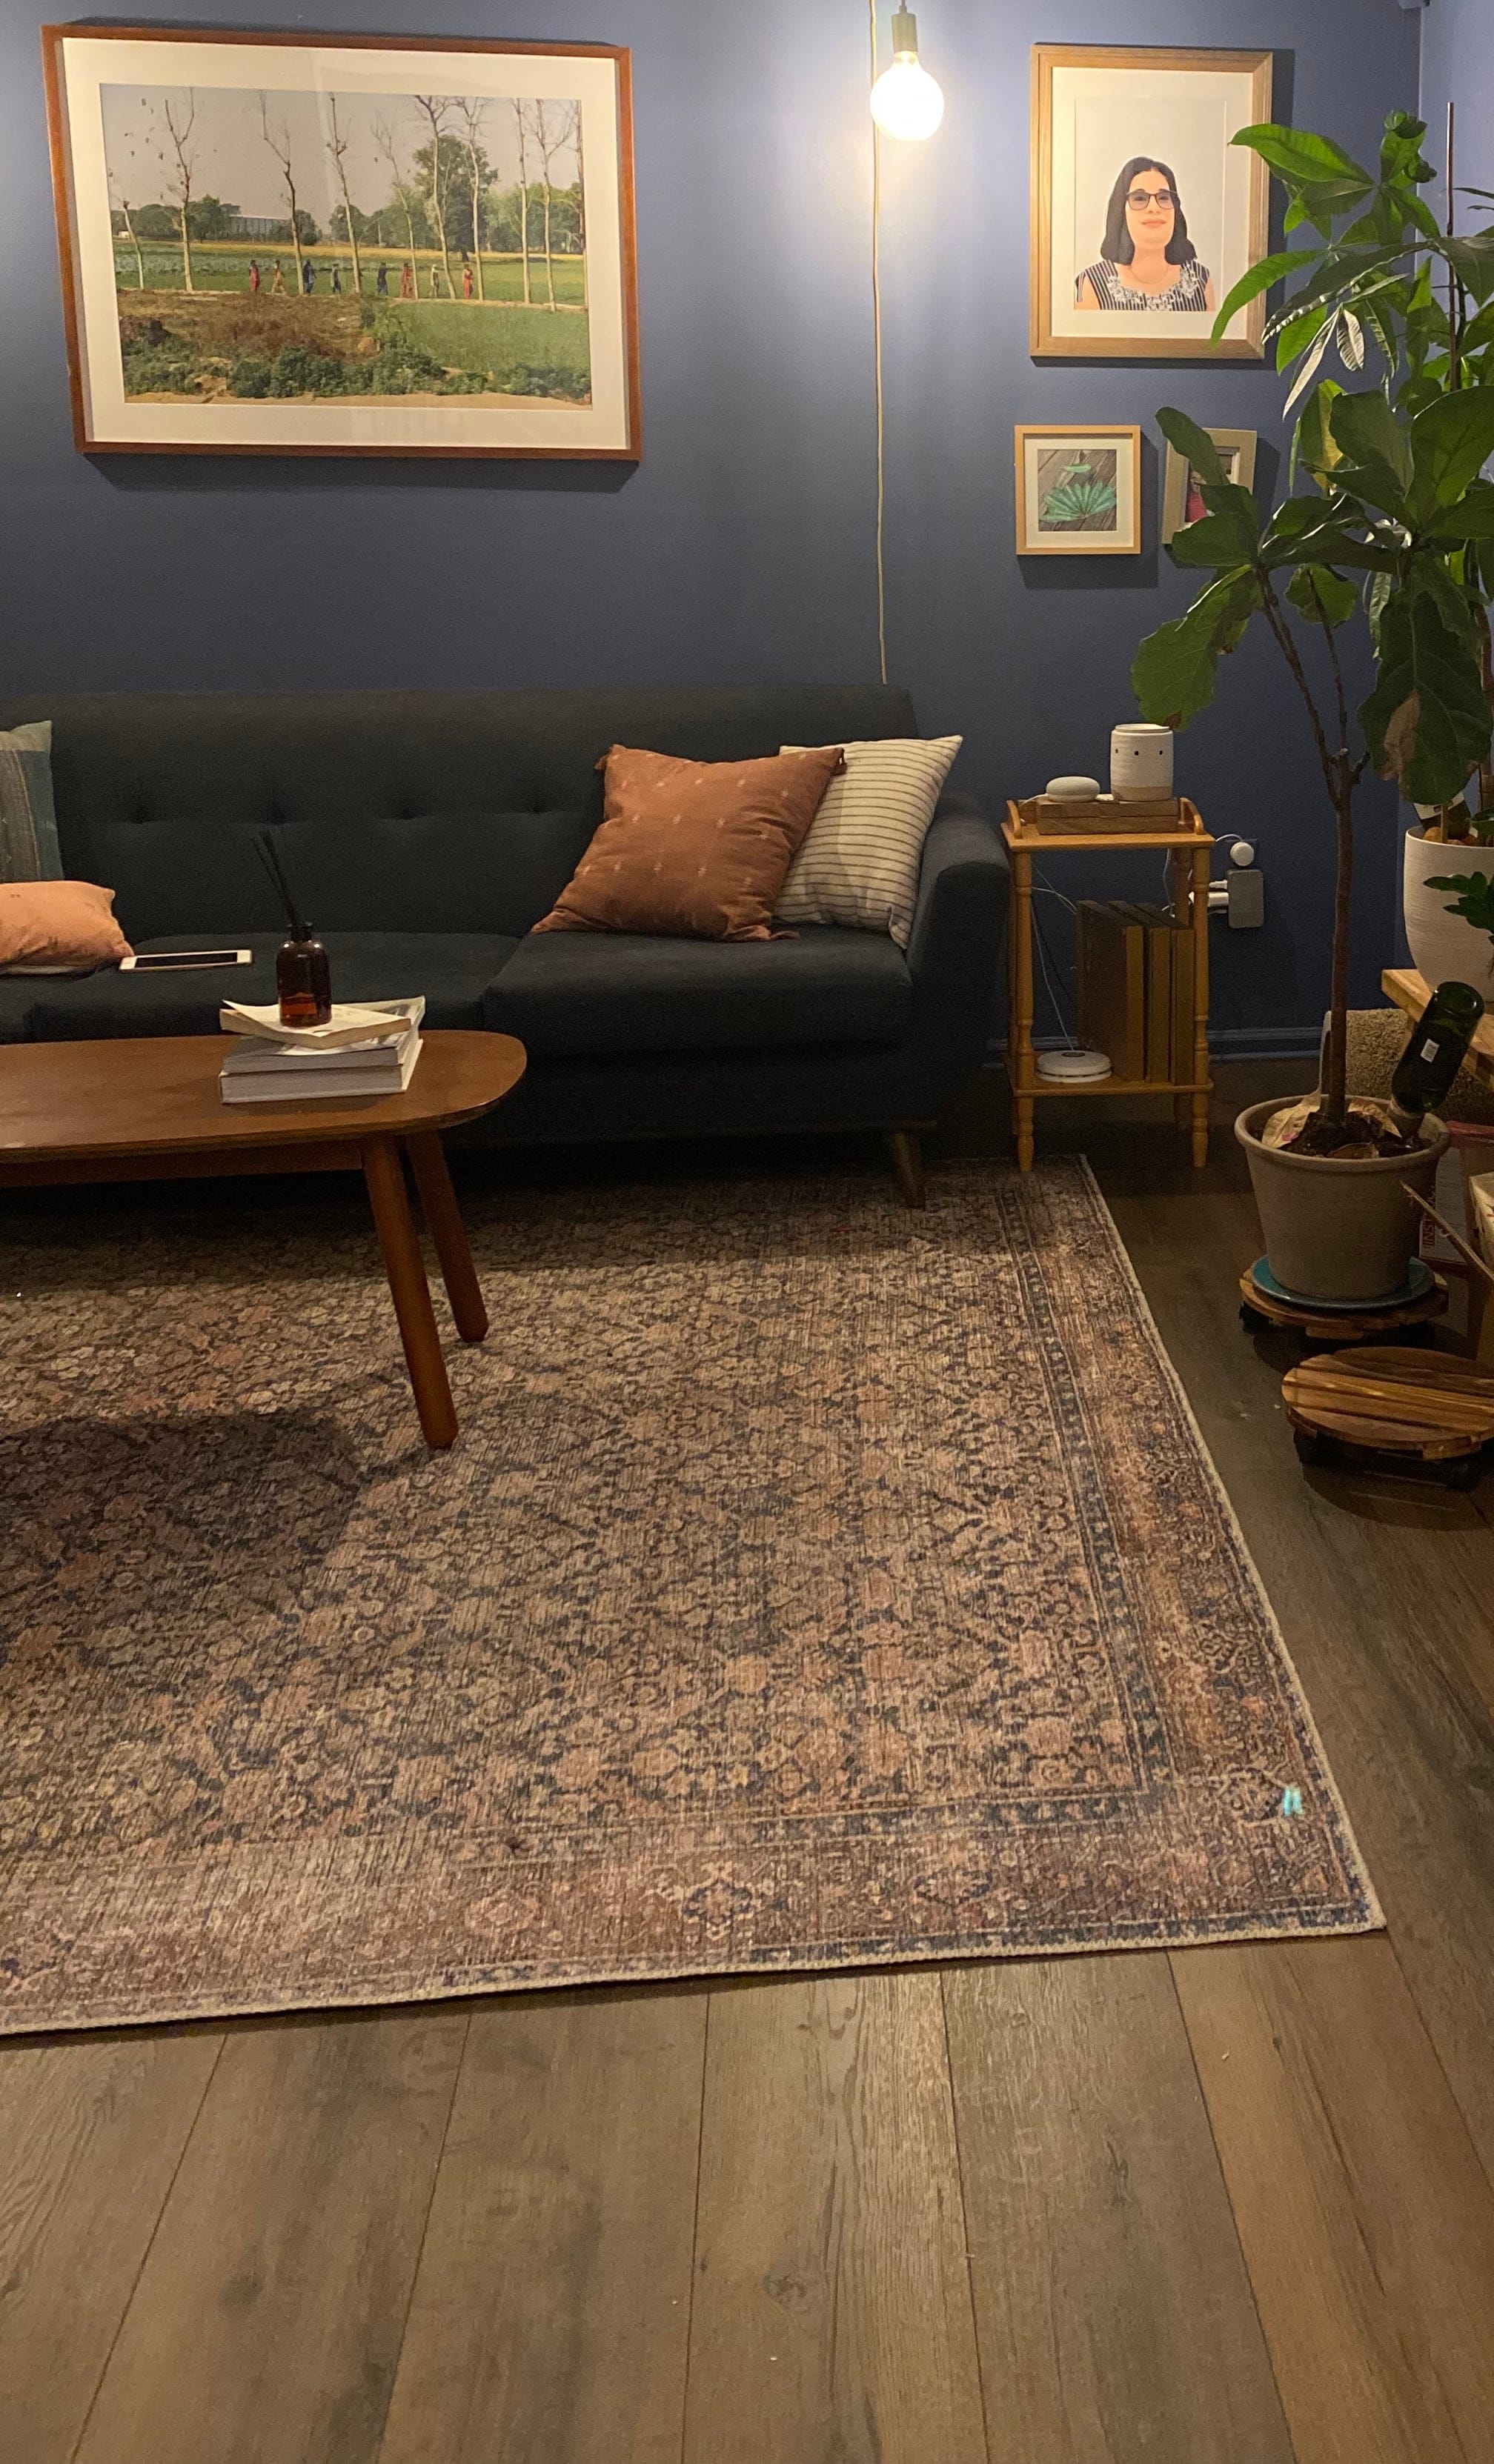 This image shows the wood texture and wide planks of Duravana's Tacoma Oak in Sandy's living room.